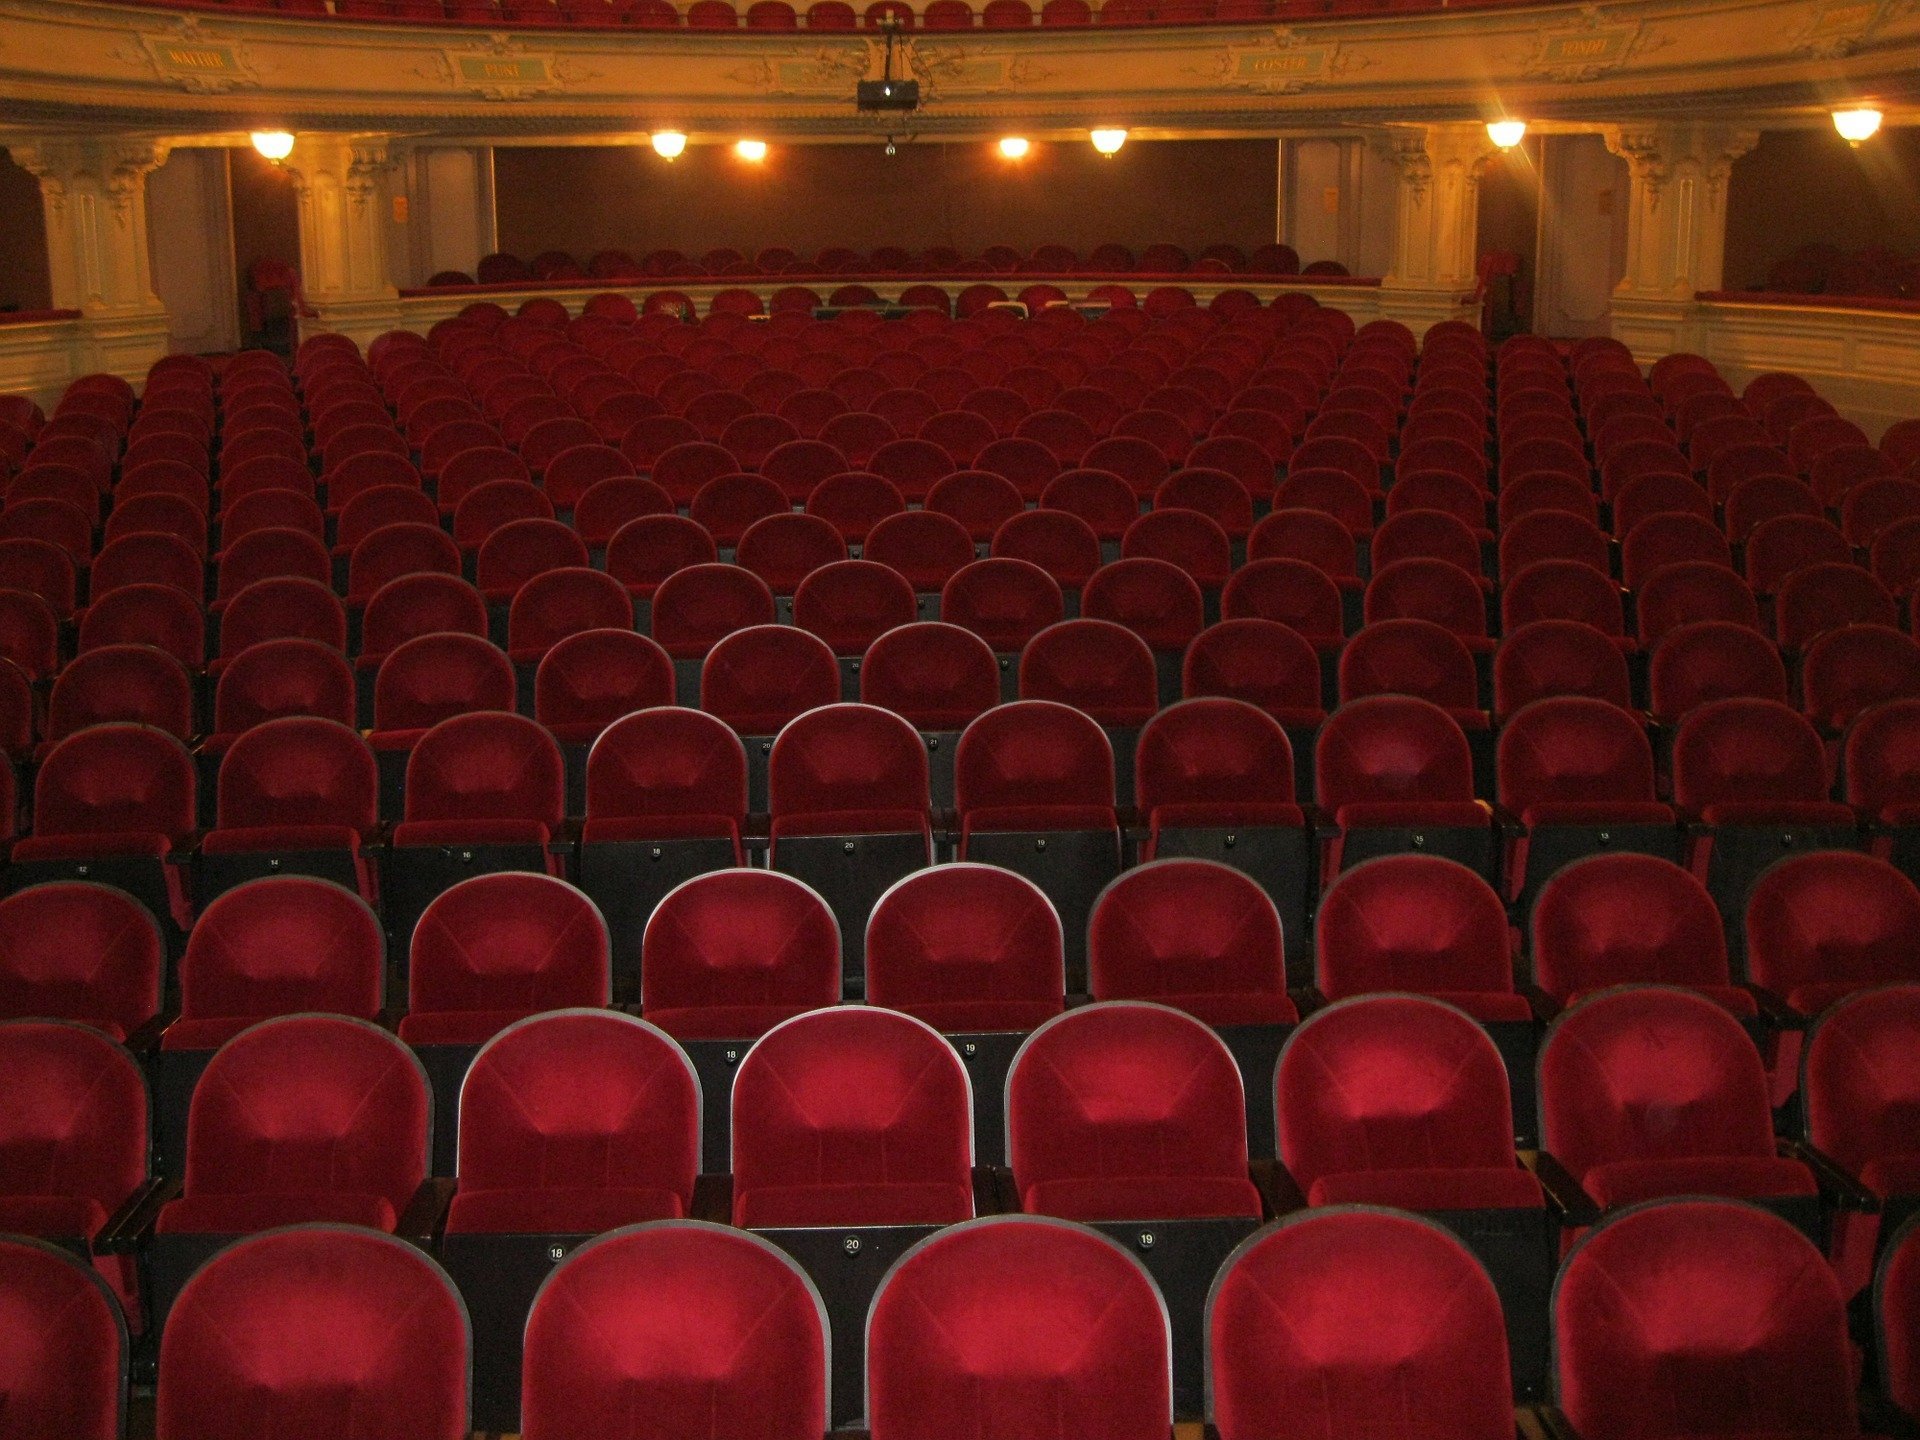 A theater of empty seats. | Photo: Pixabay